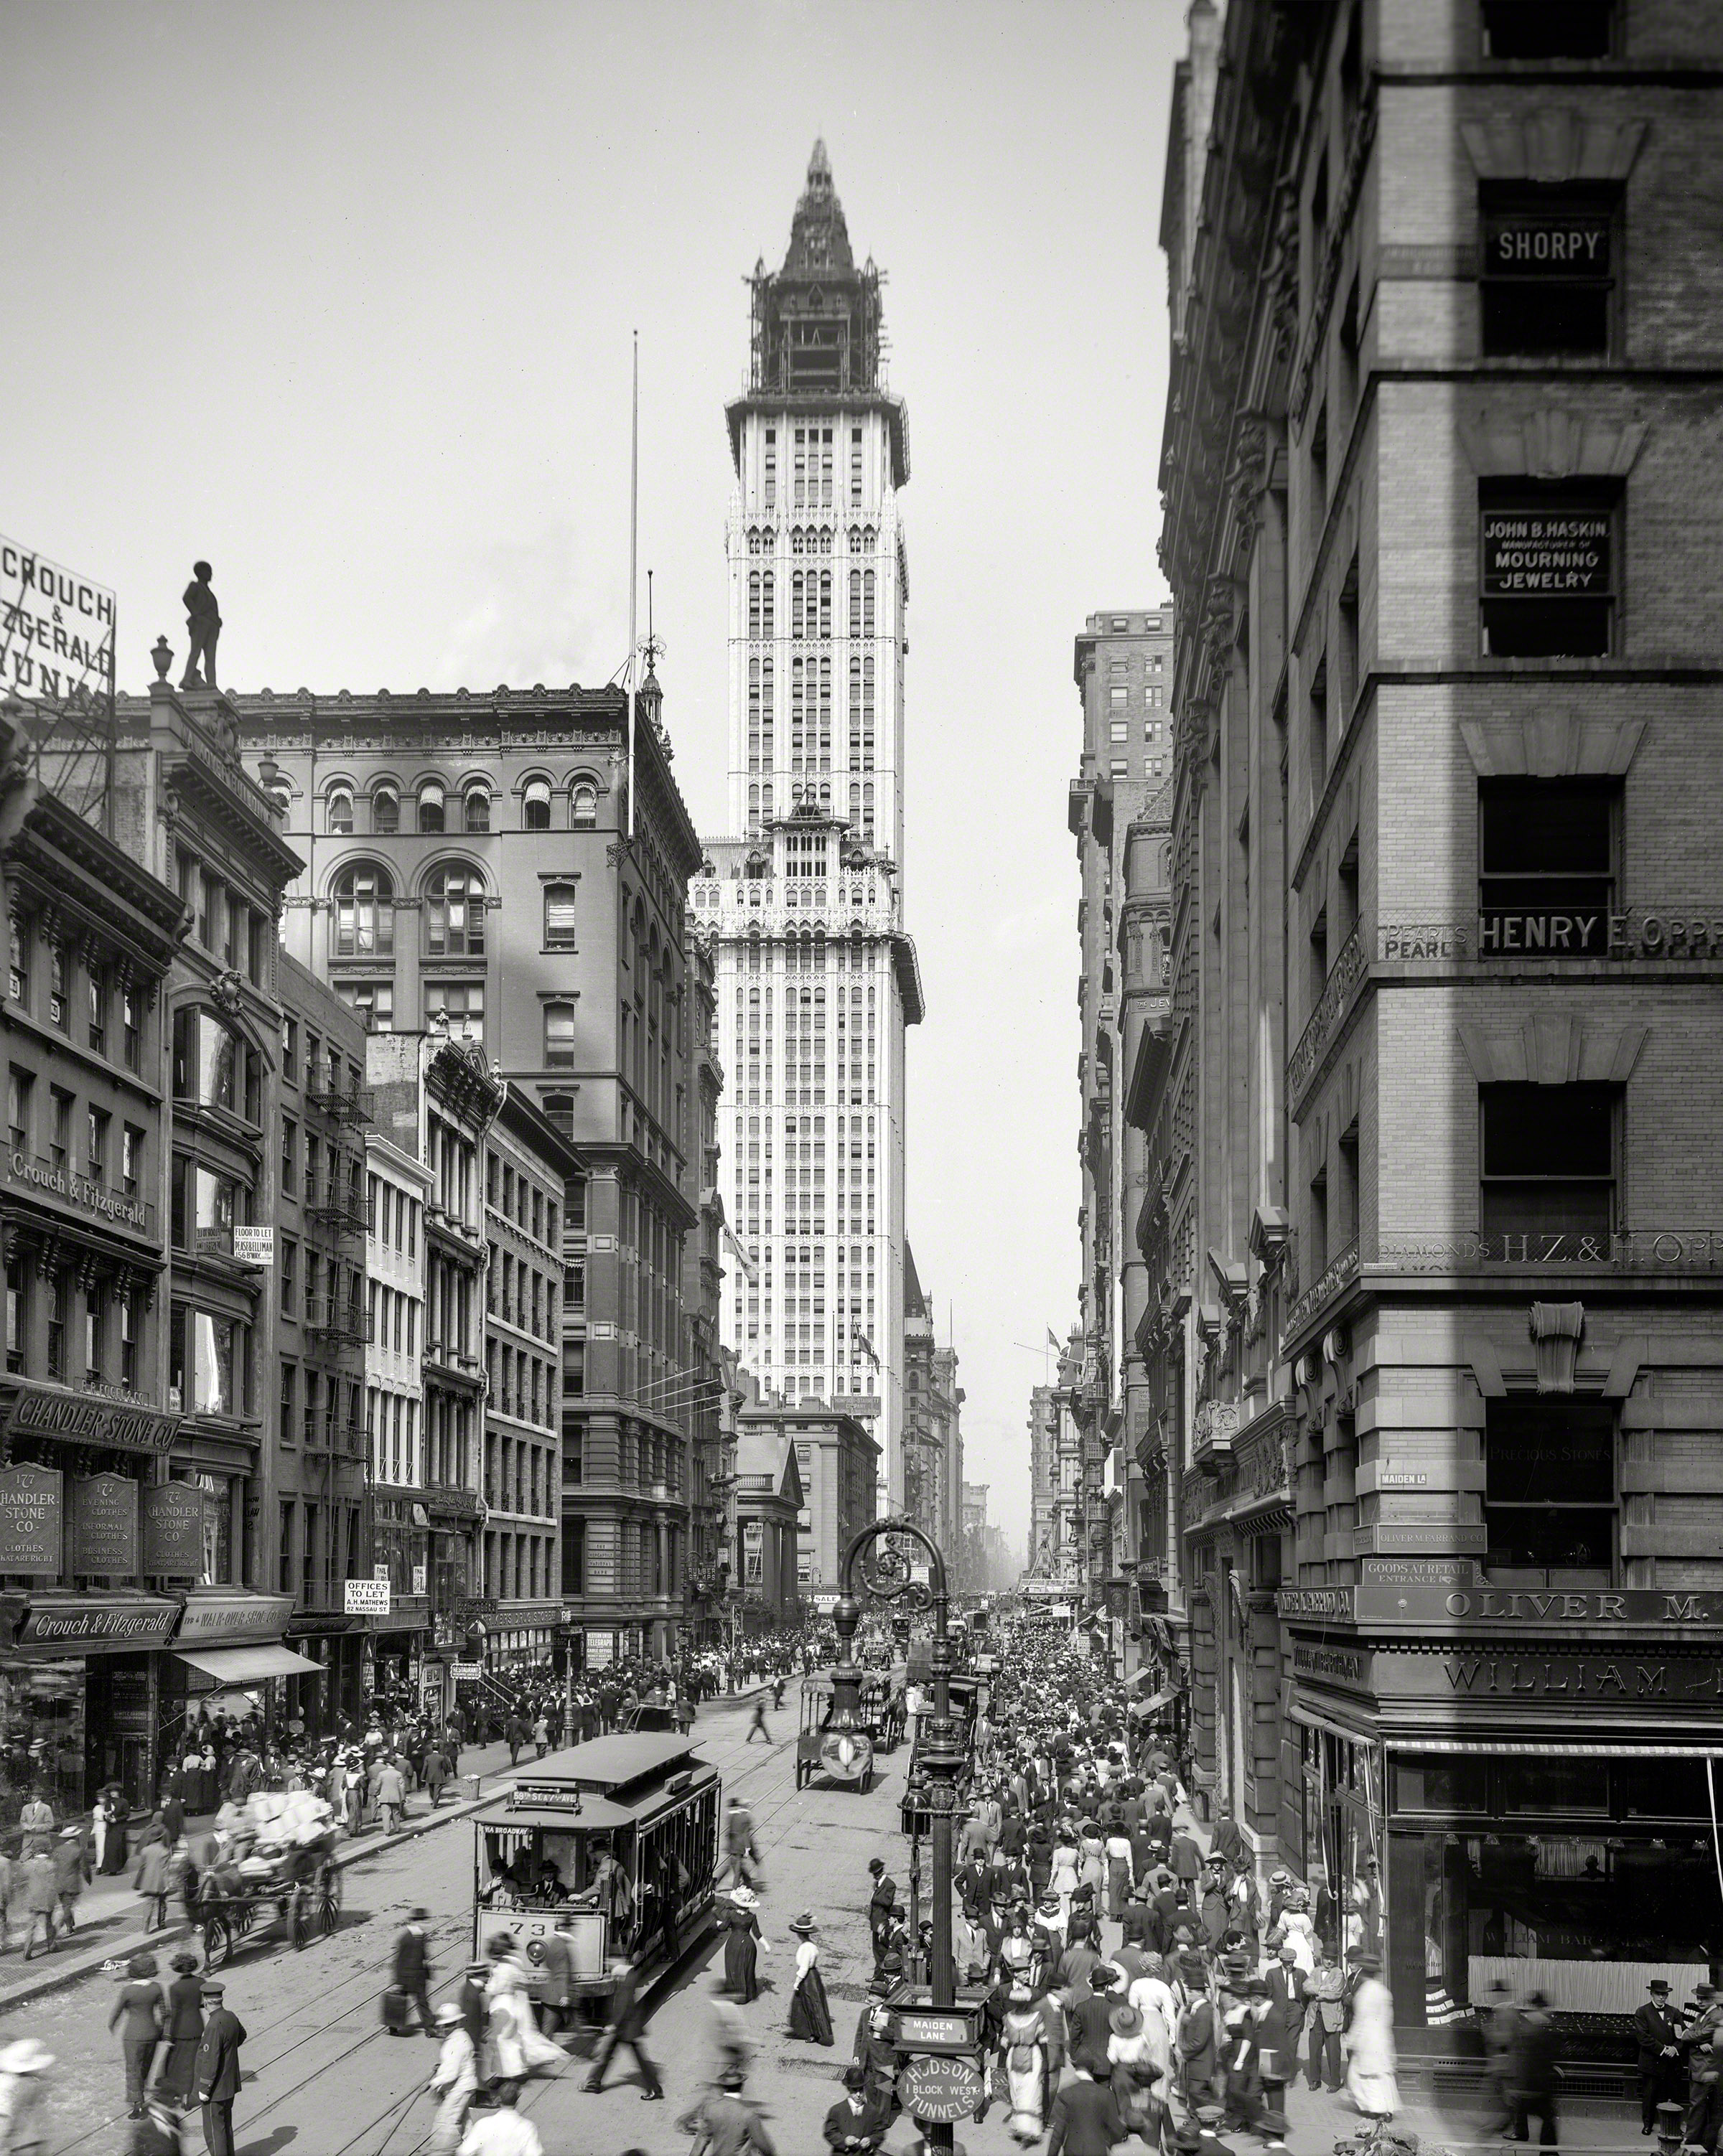 New York circa 1912. "Broadway, looking north from Cortlandt Street and Maiden Lane." Starring the Woolworth Building, in the final stages of construction. 8x10 inch dry plate glass negative, Detroit Publishing Company. View full size.